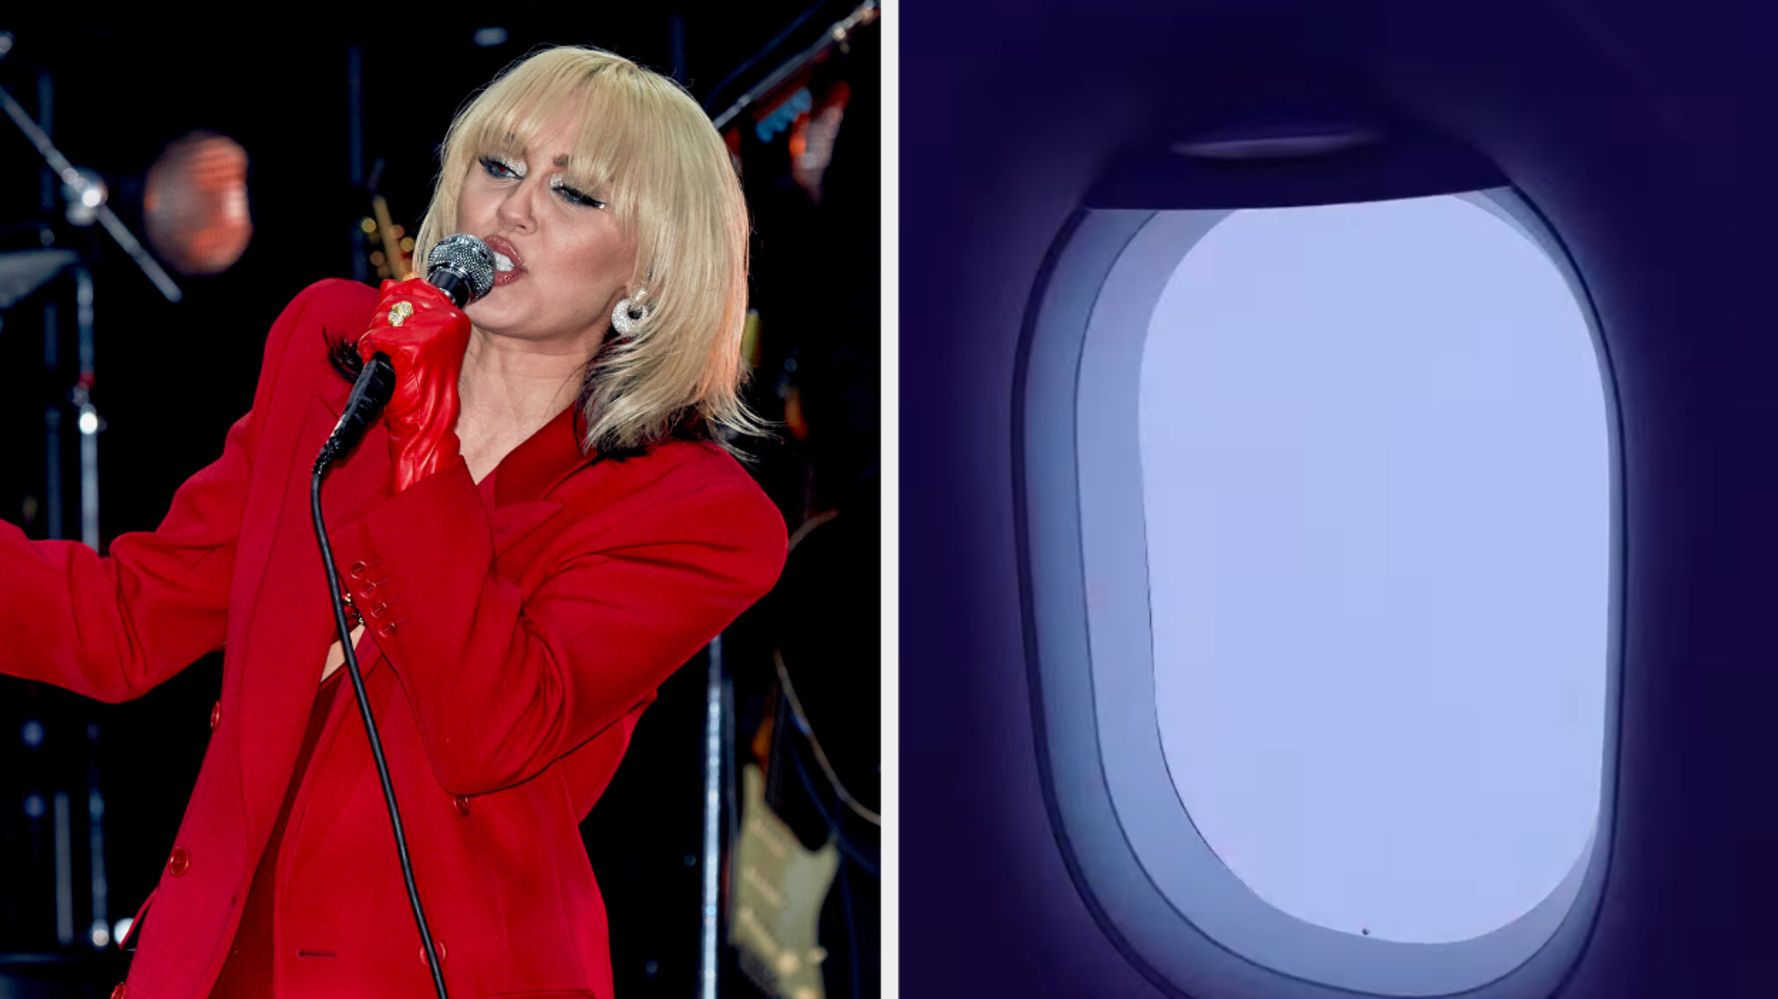 Miley Cyrus Shares Terrifying Footage After Private Jet Is Forced To Make Emergency Landing 